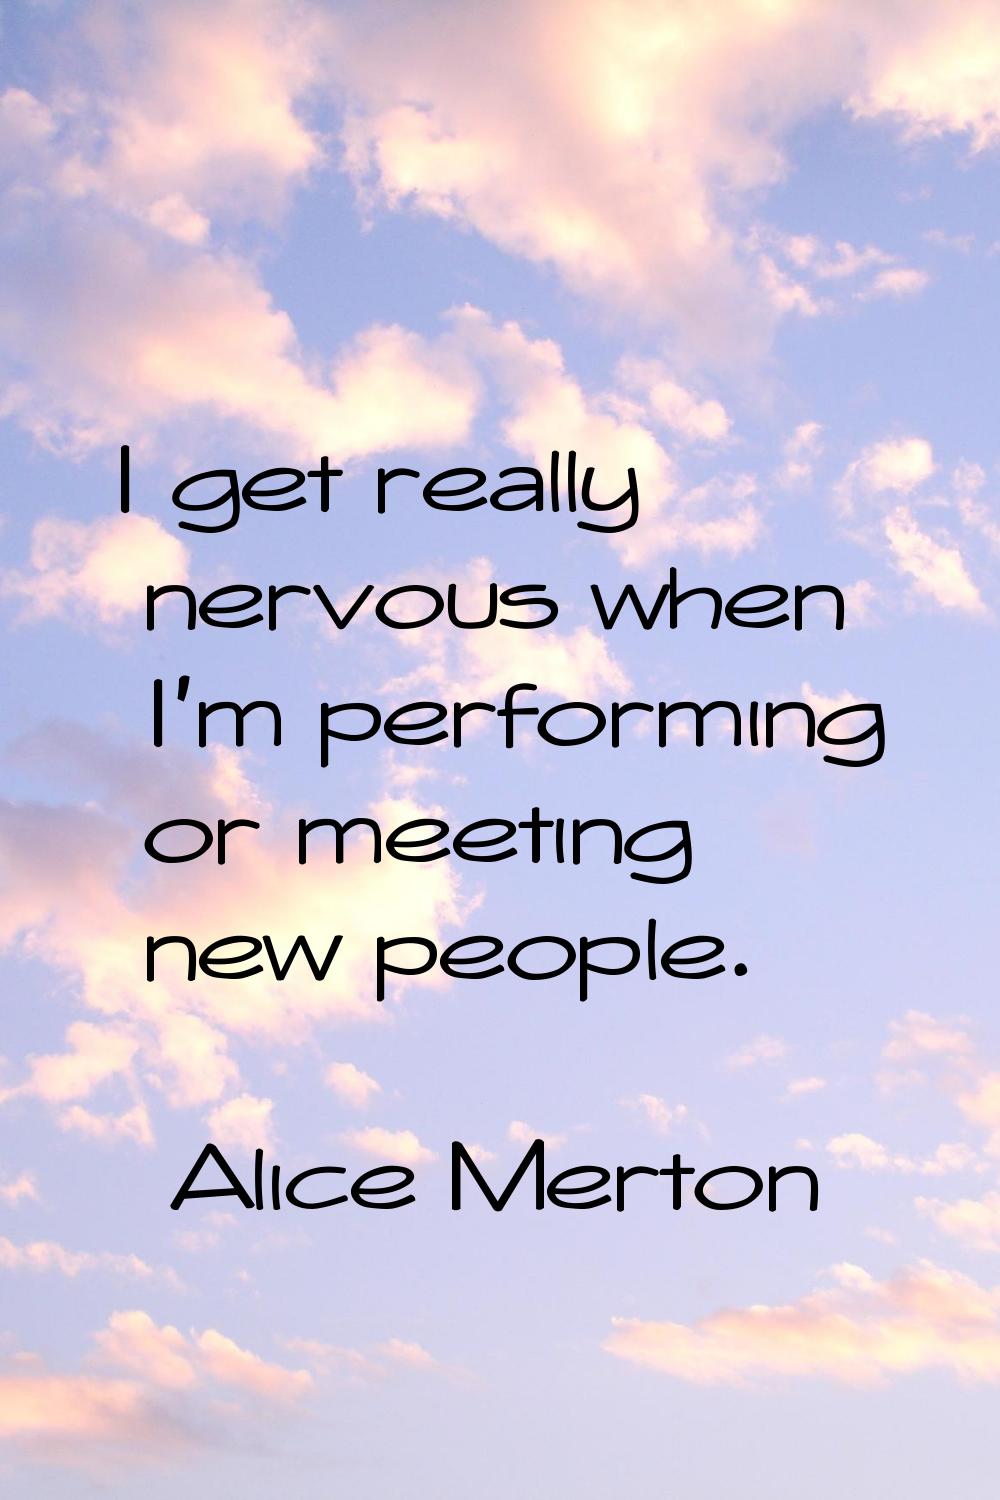 I get really nervous when I'm performing or meeting new people.